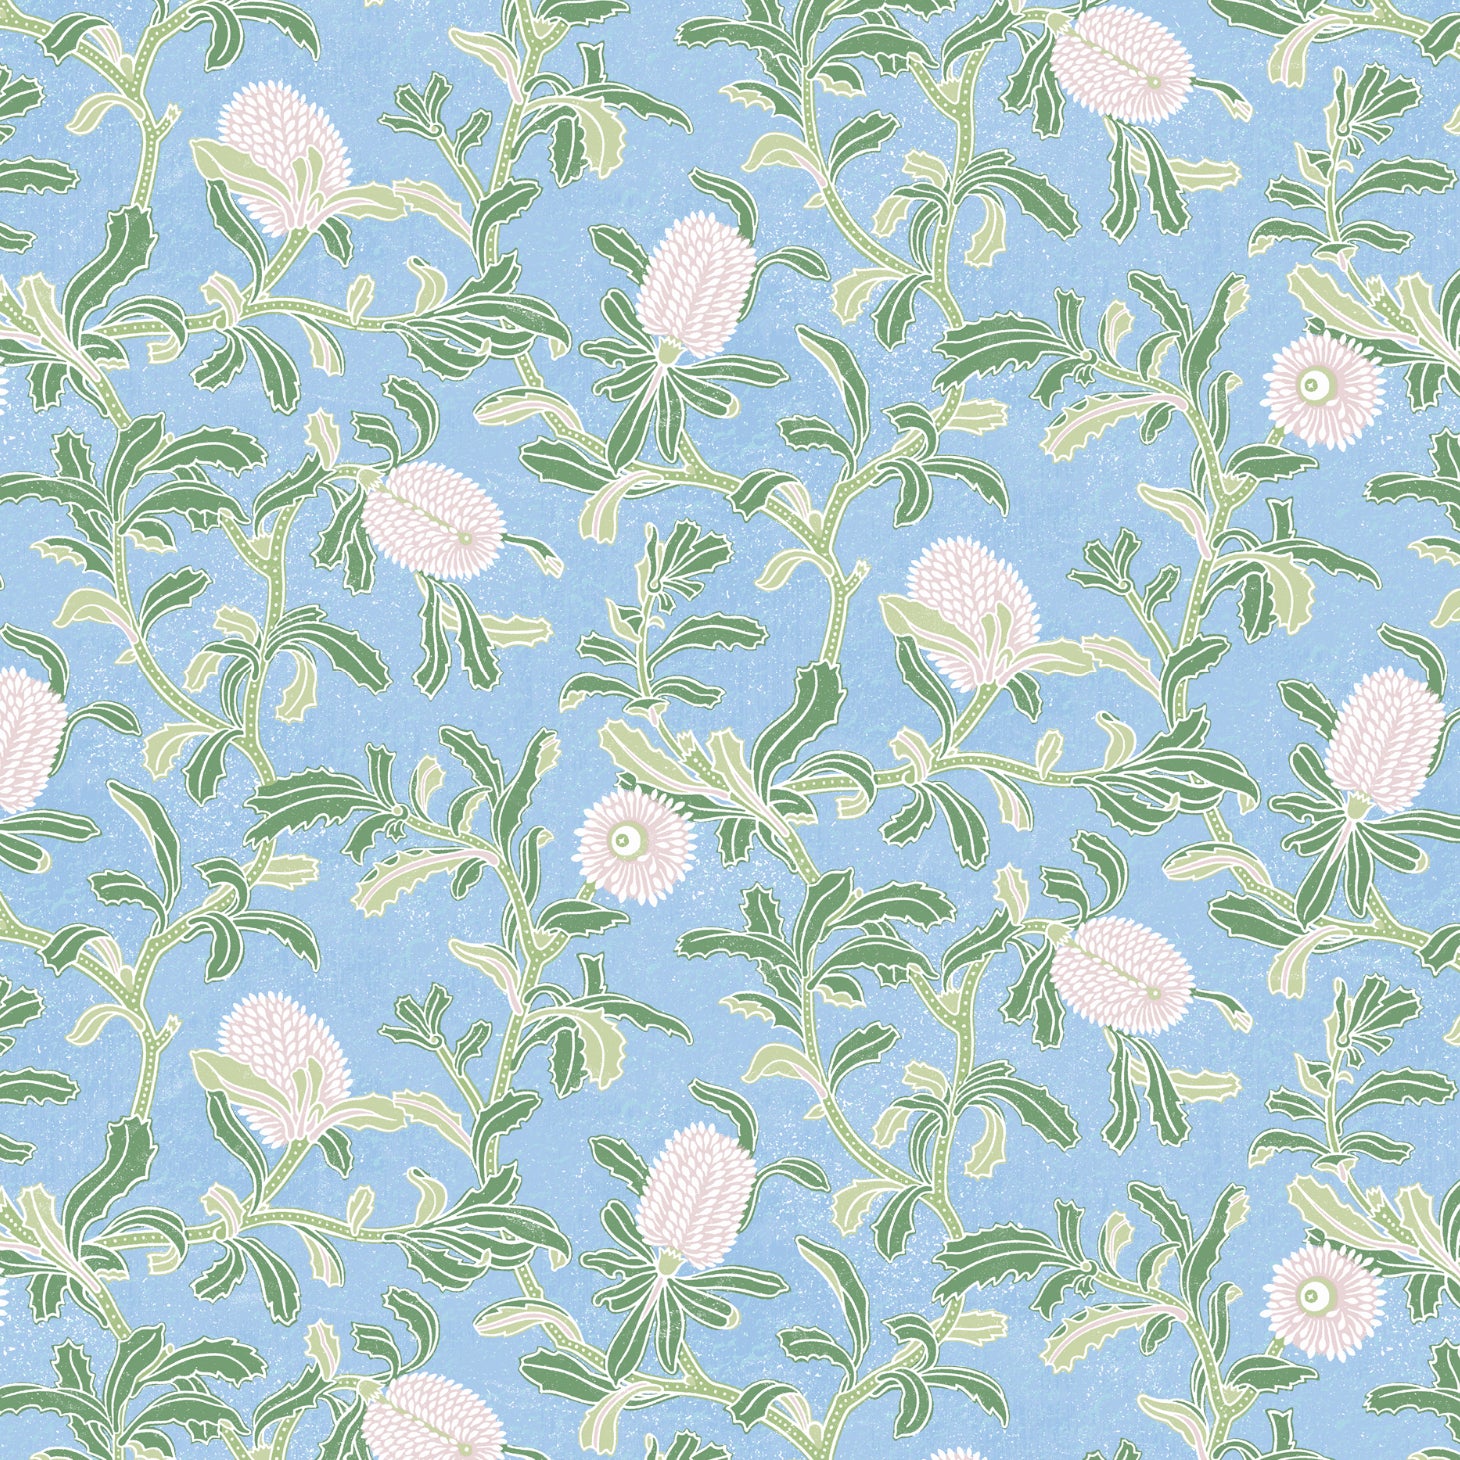 Detail of wallpaper in a floral print in shades of white and green on a light blue field.